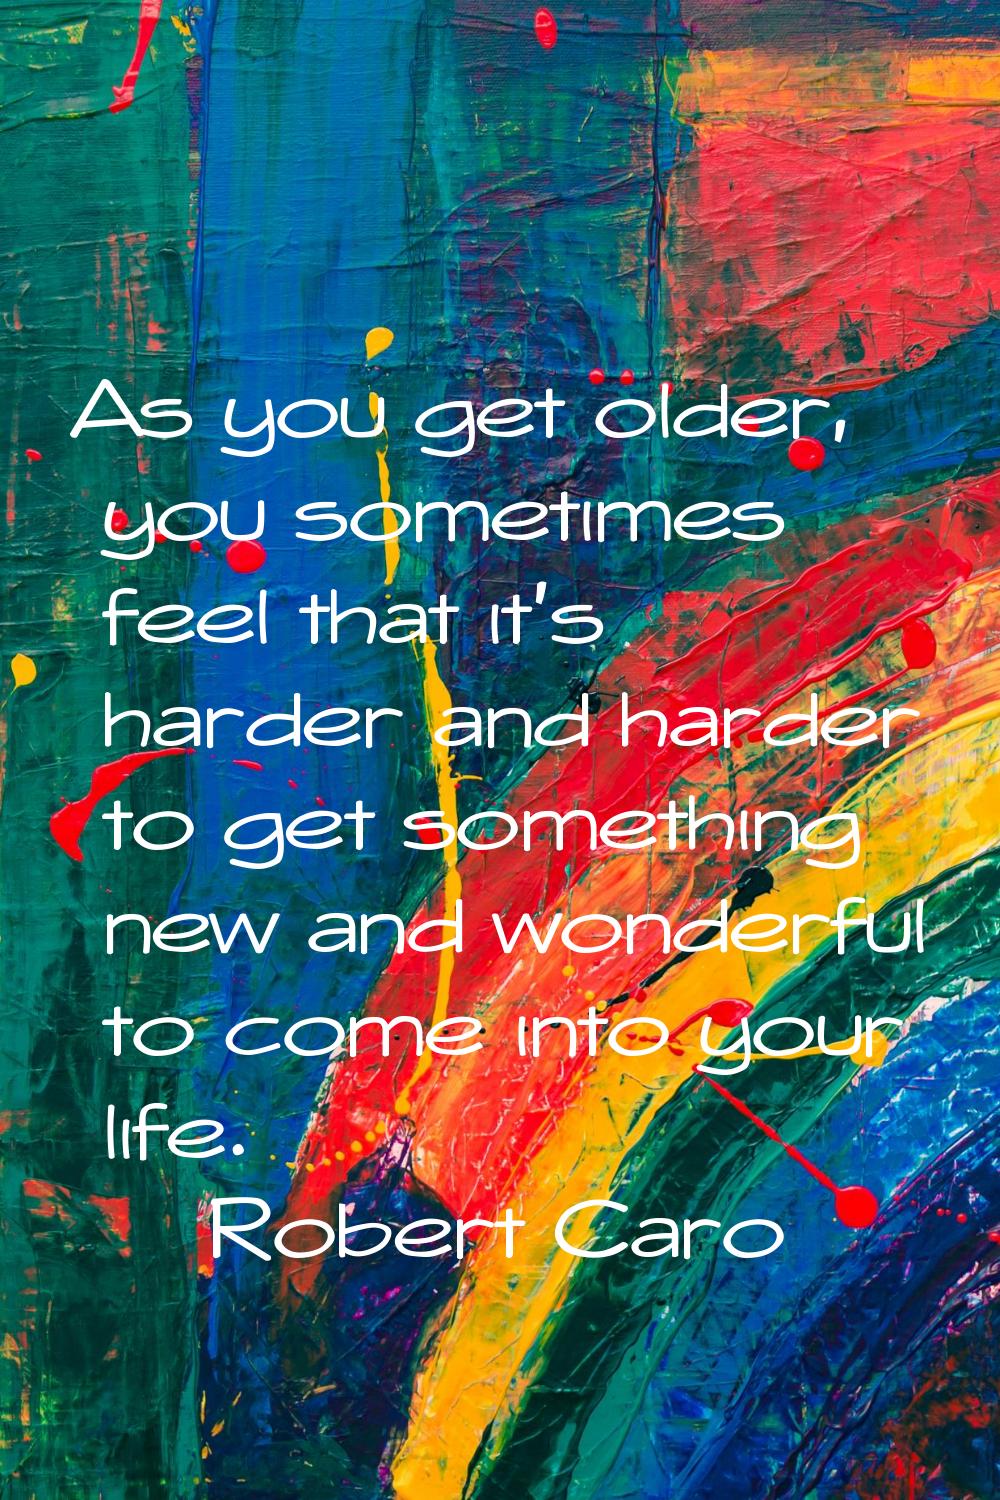 As you get older, you sometimes feel that it's harder and harder to get something new and wonderful